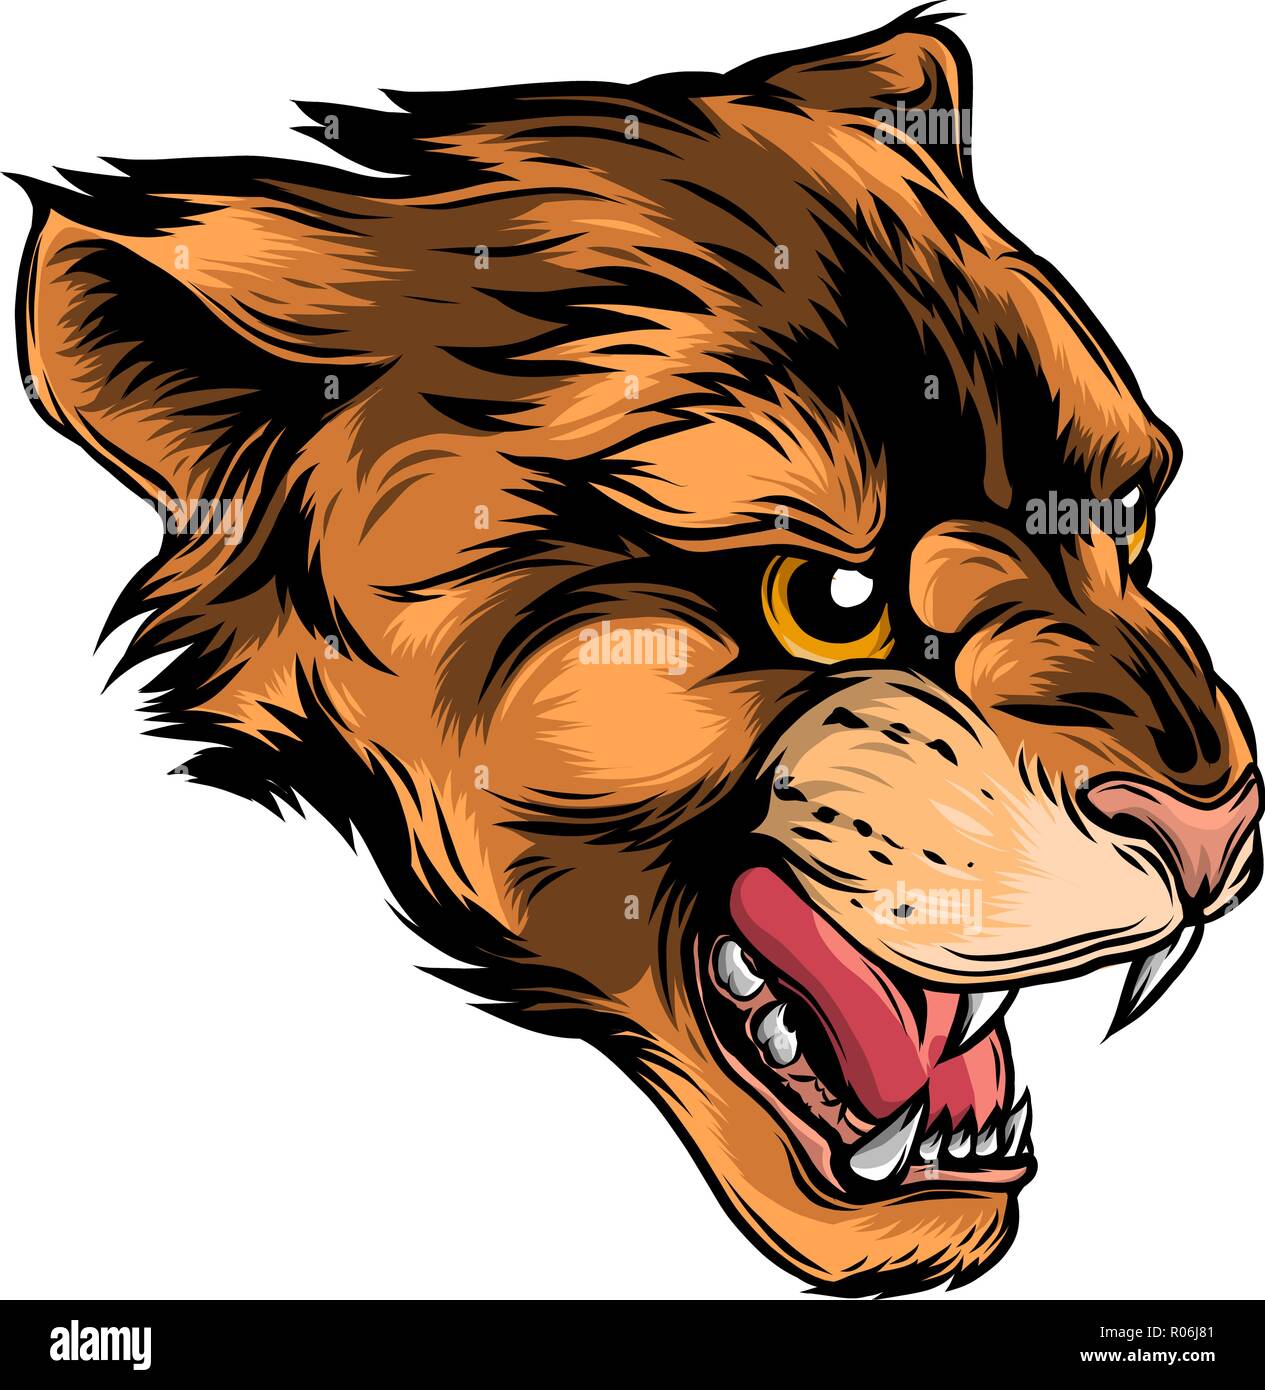 Cougar Panther Mascot Head Vector Graphic illustration Stock Vektor